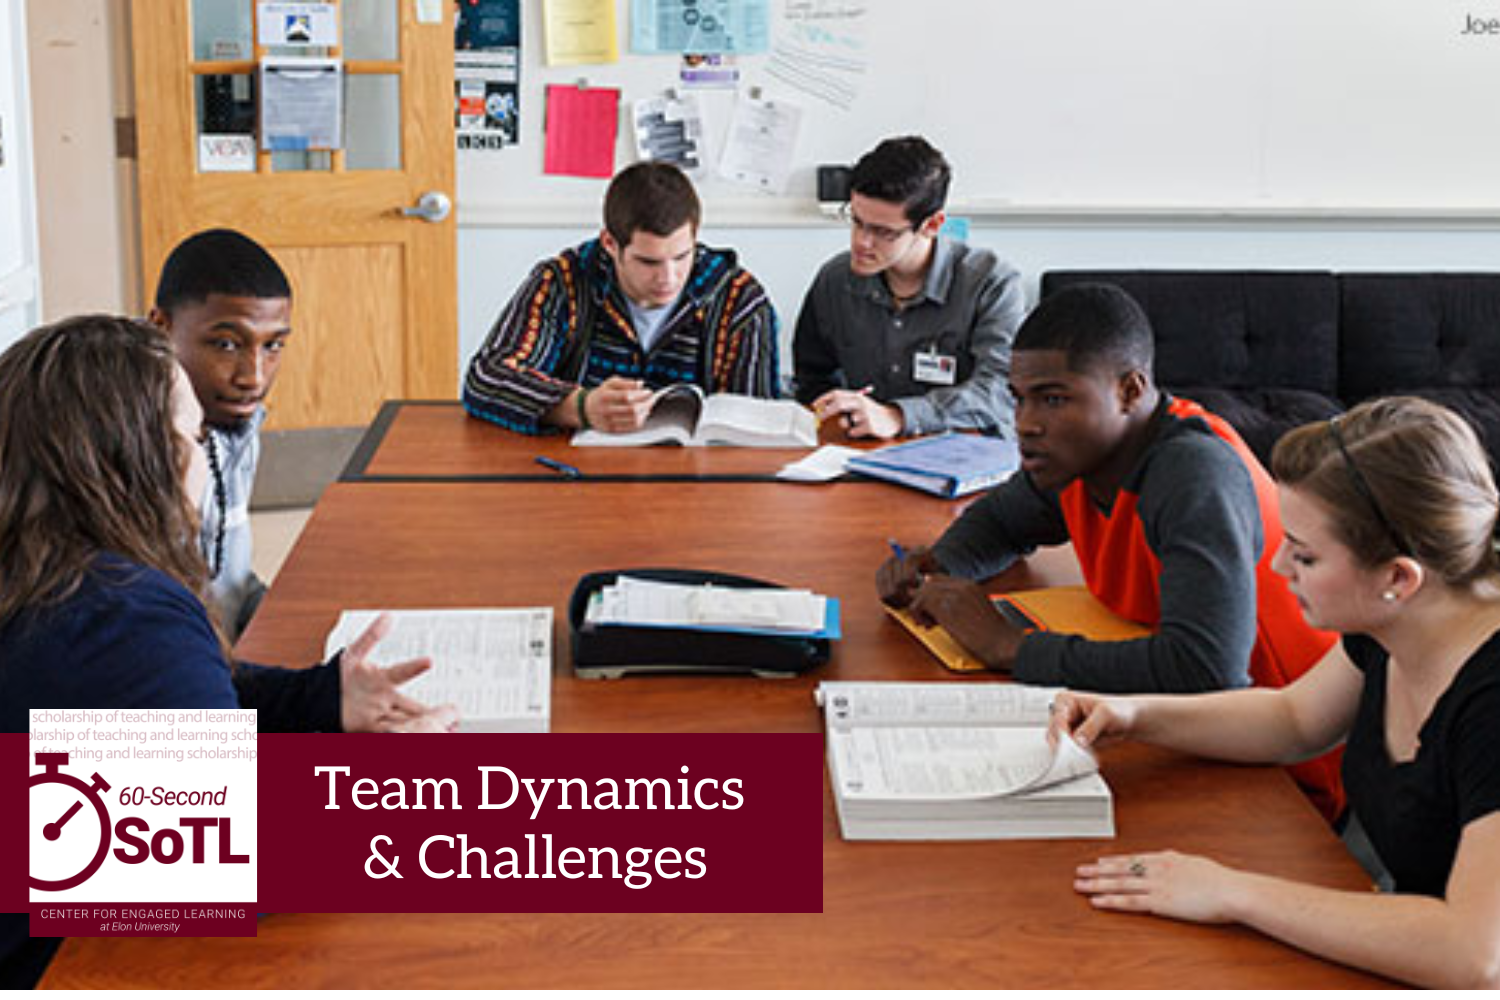 Six people sit around a table, grouped in three pairs. Each pair is looking at a thick book. An overlay reads, "60-Second SoTL. Team dynamics and challenges."